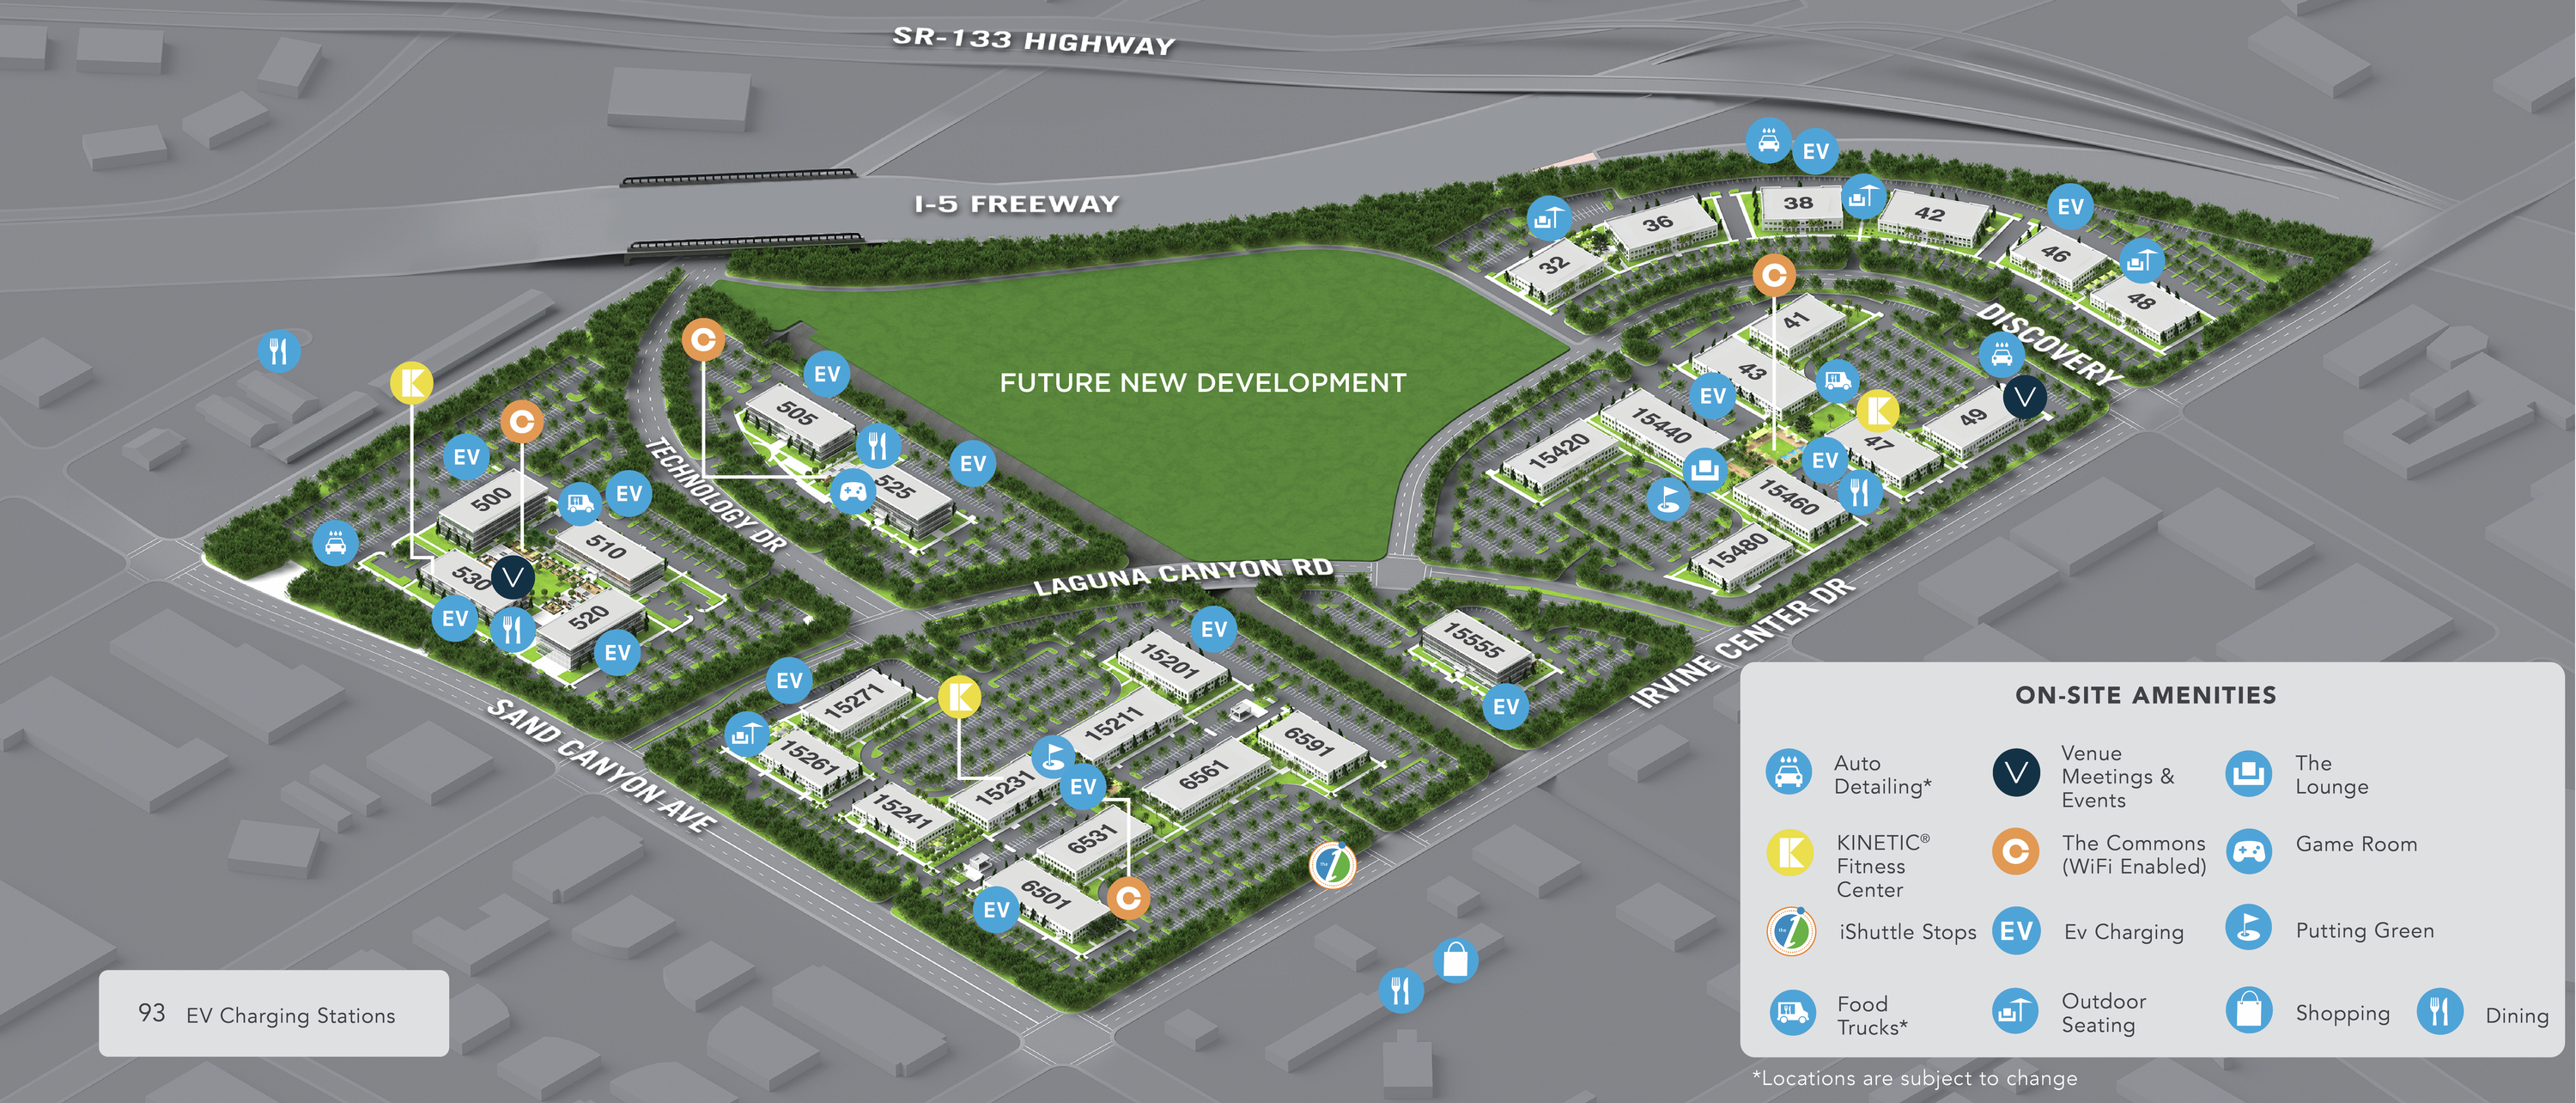 Site Map for Discvoery Park located in Irvine, CA